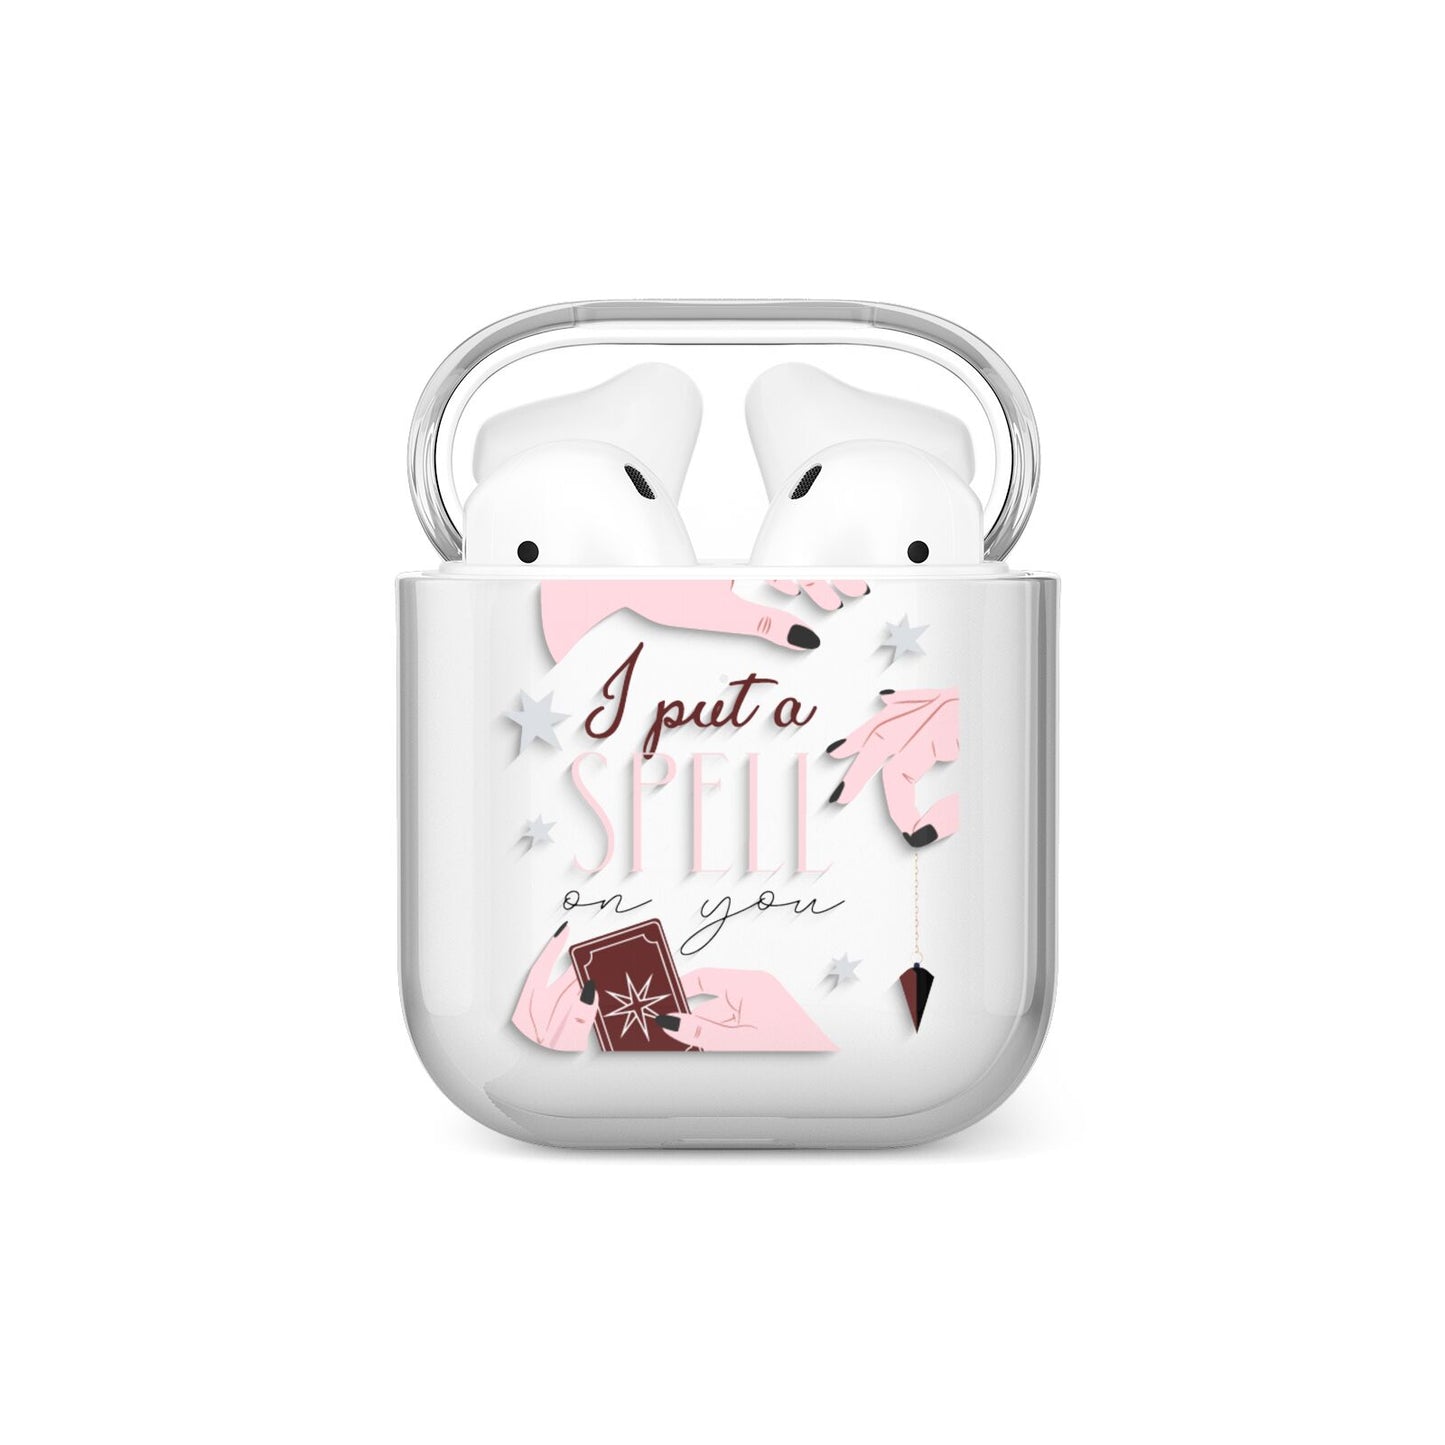 Witches Hands and Tarot Cards AirPods Case